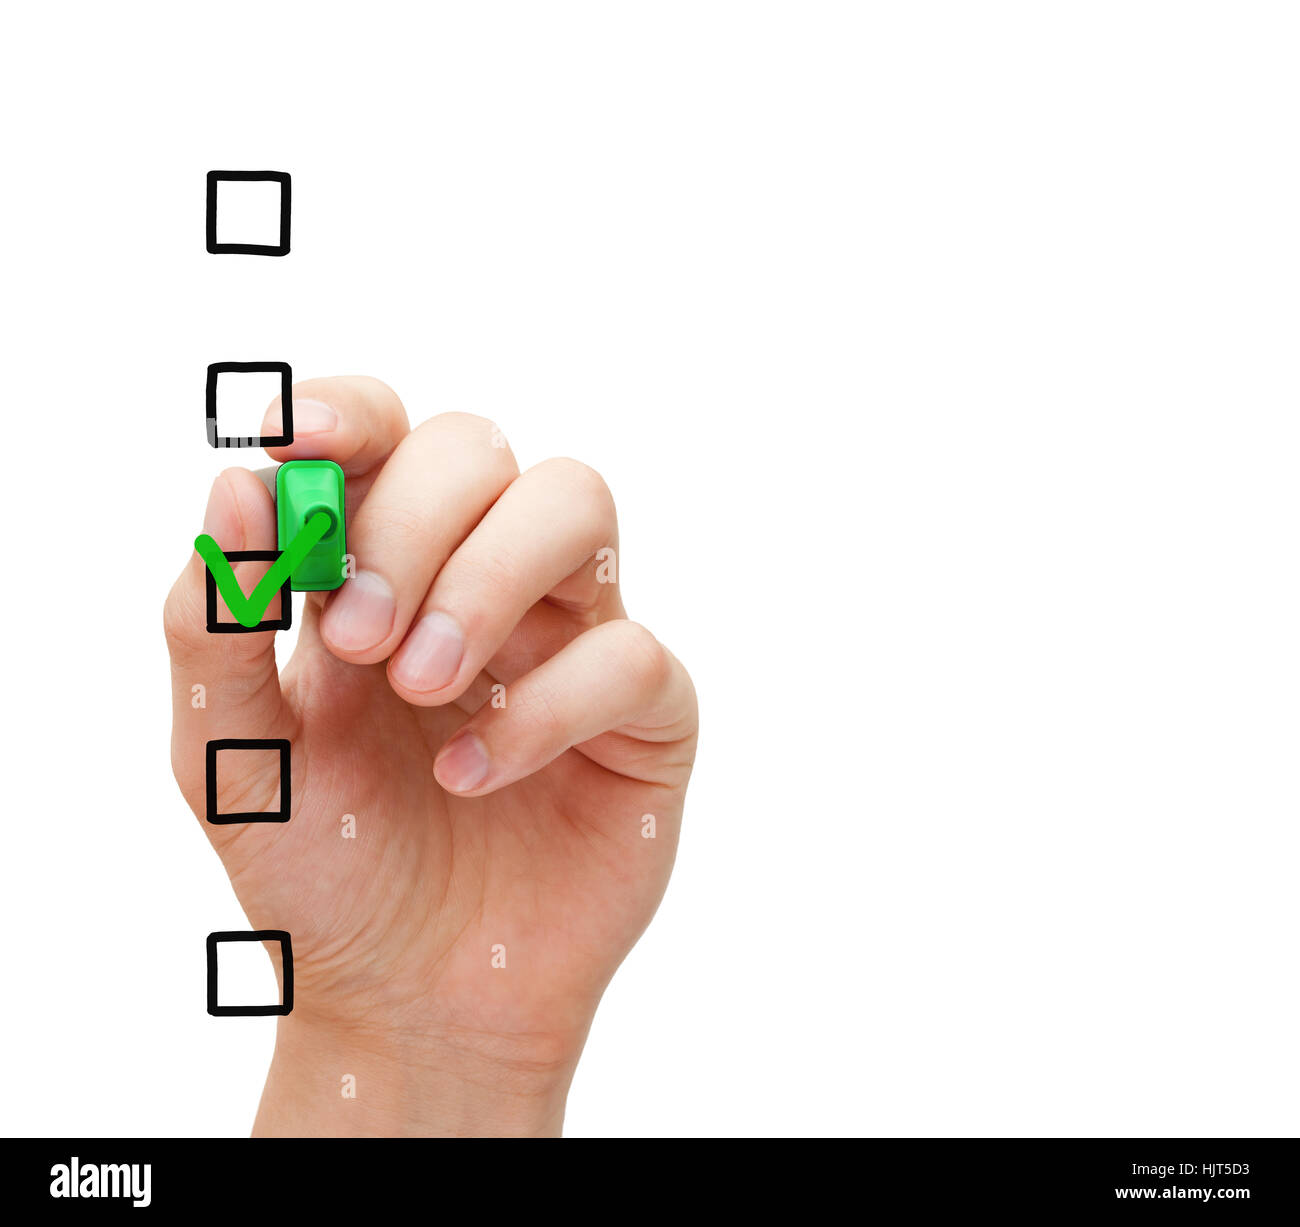 Hand putting check mark with green marker on blank survey checklist on transparent glass board. Stock Photo